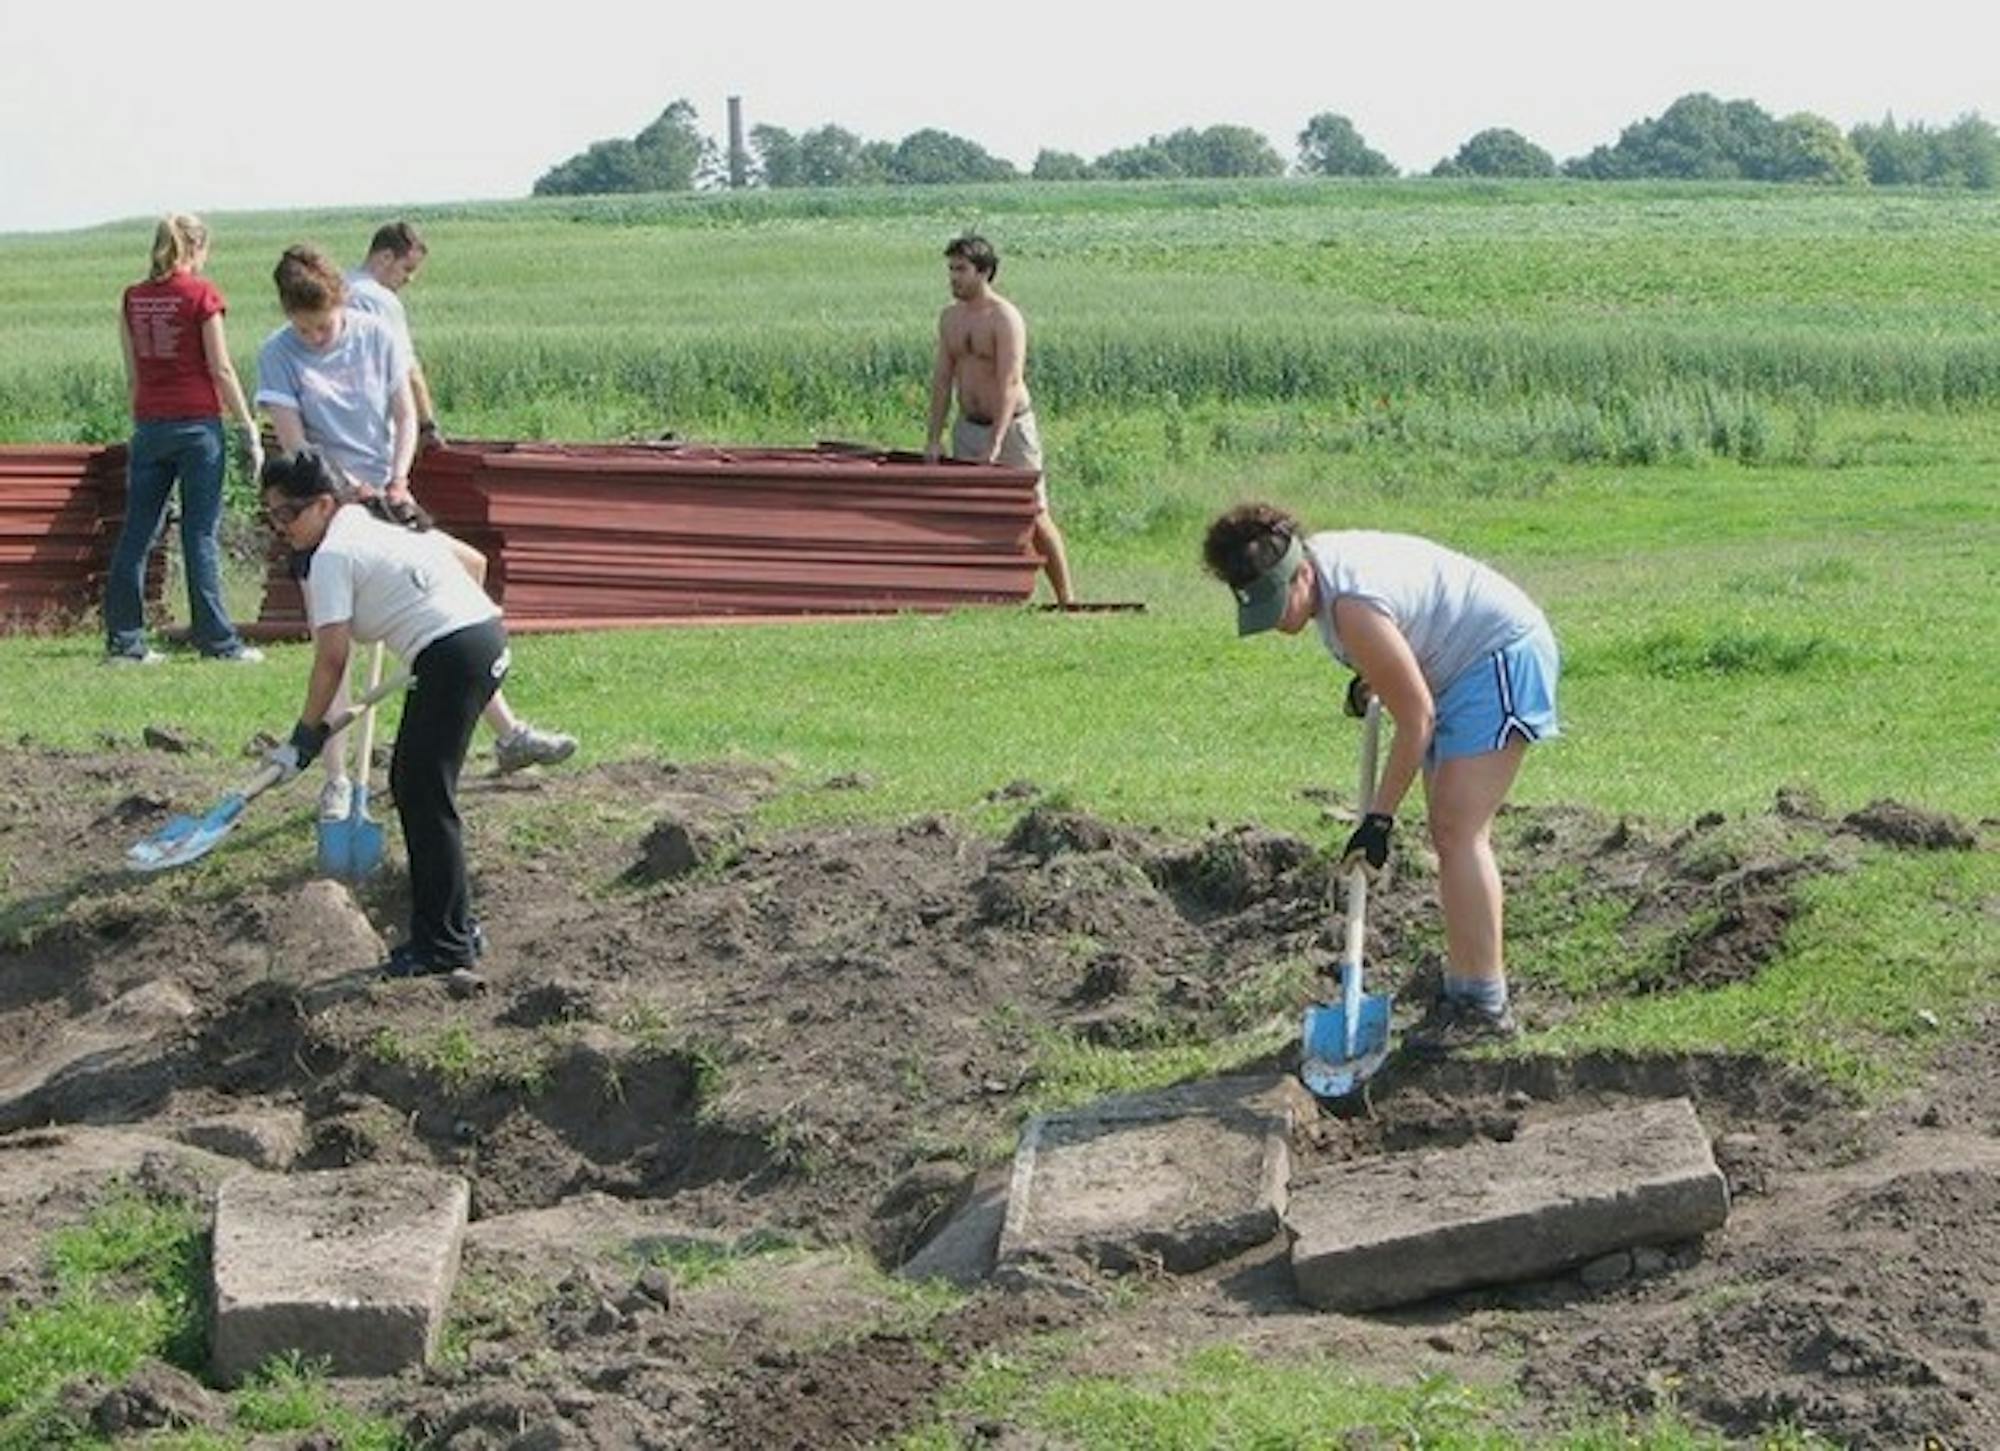 Students involved in the new program Project Preservation uncovered and restored a Holocaust grave site while in Druzhkopol, Ukraine this past June.